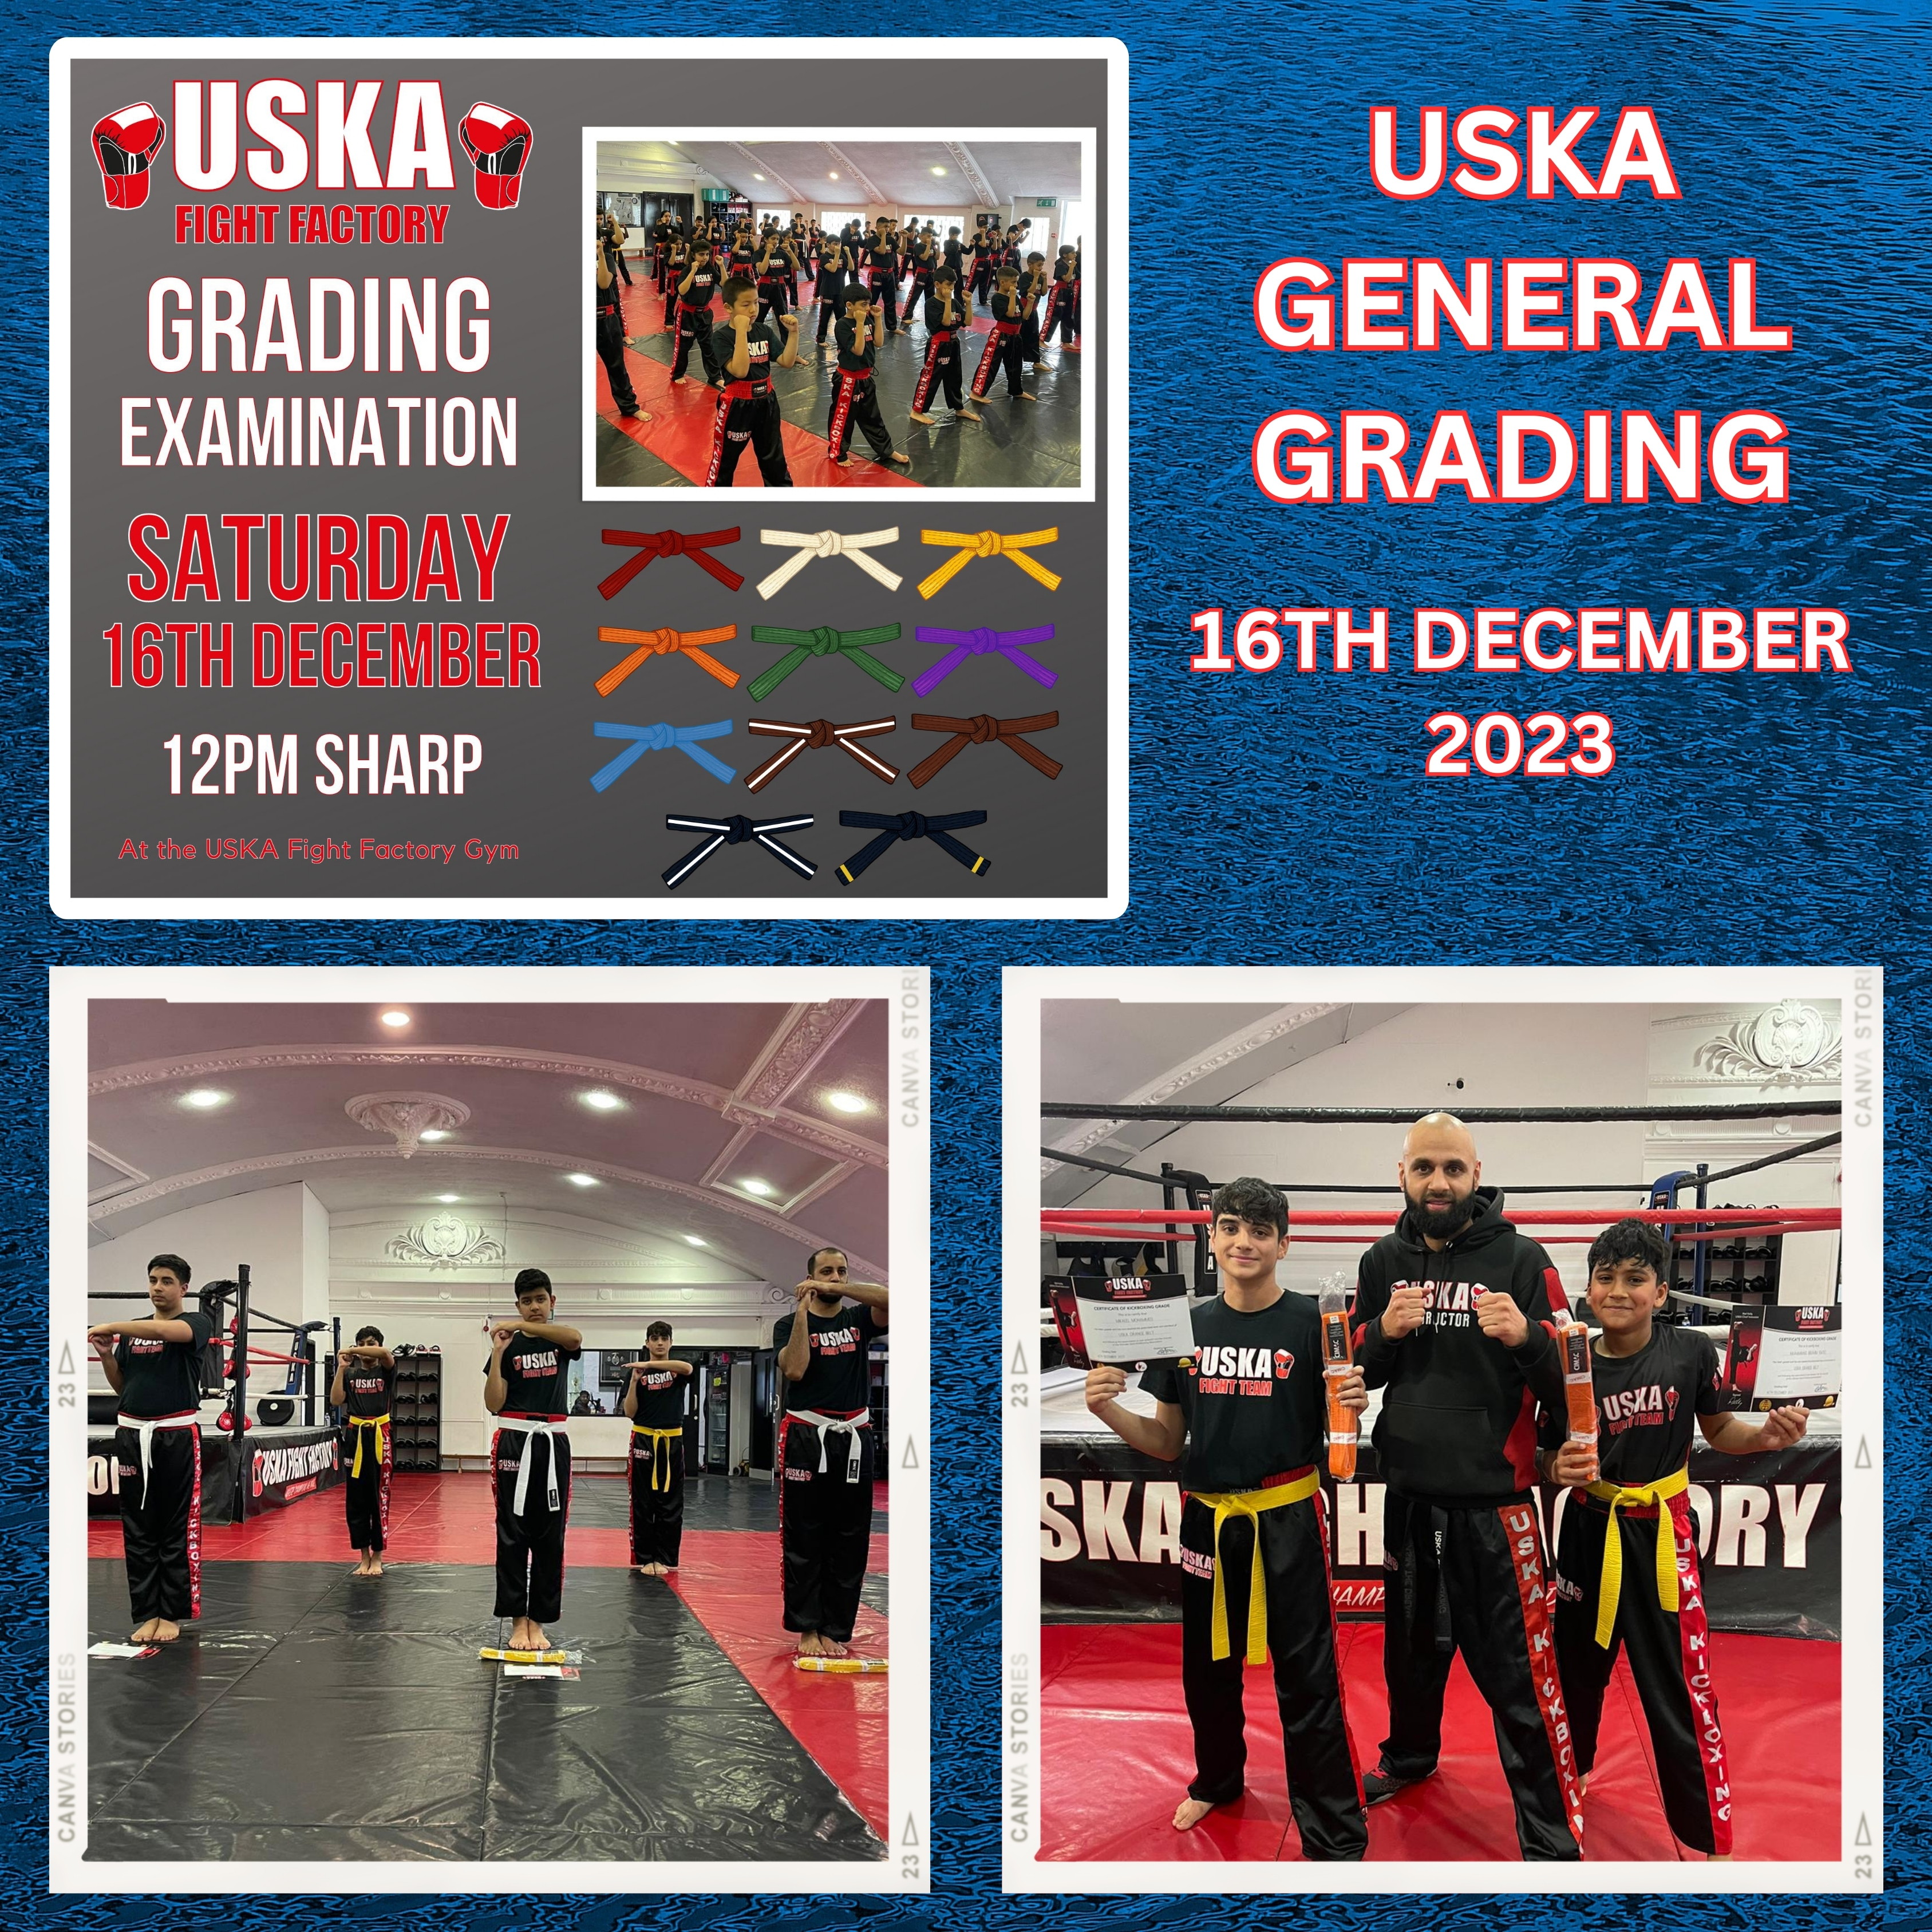 16-12-23 - Another Successful General Grading completed at the USKA Fight Factory.